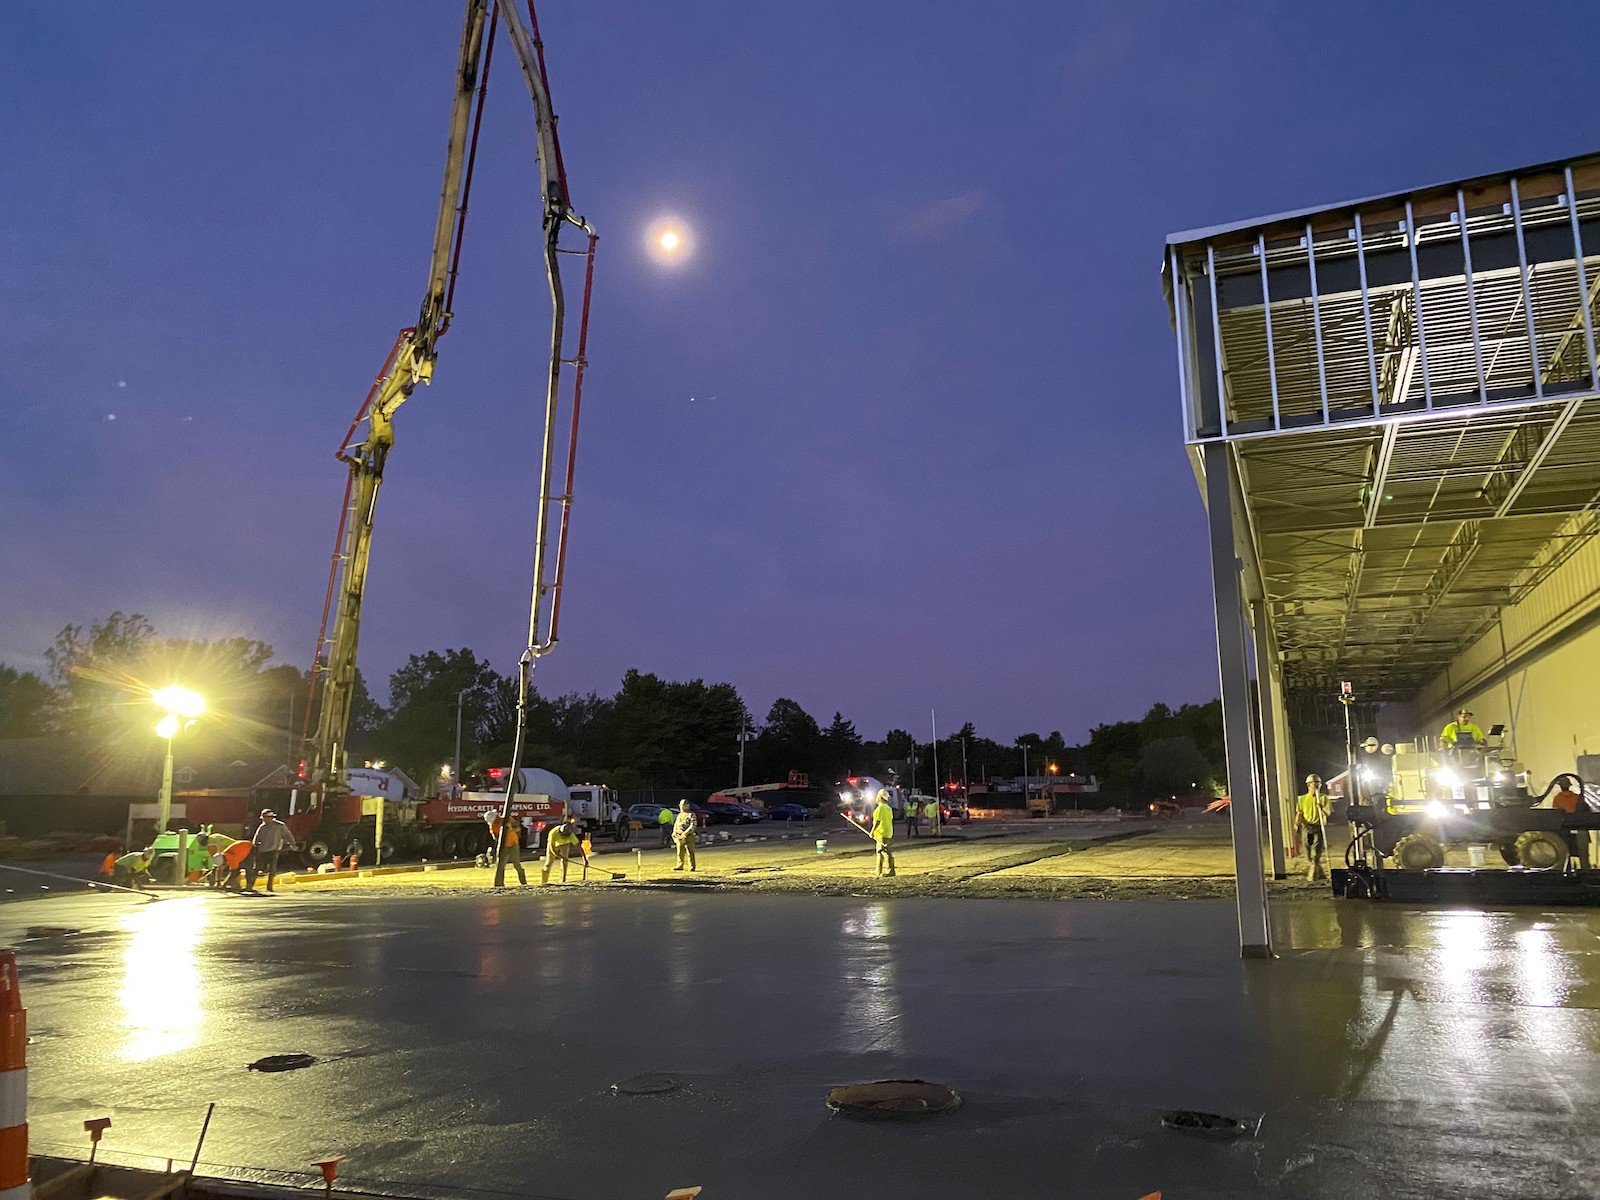 Construction workers continue to pour concrete as the sun sets with the help of several portable lights.